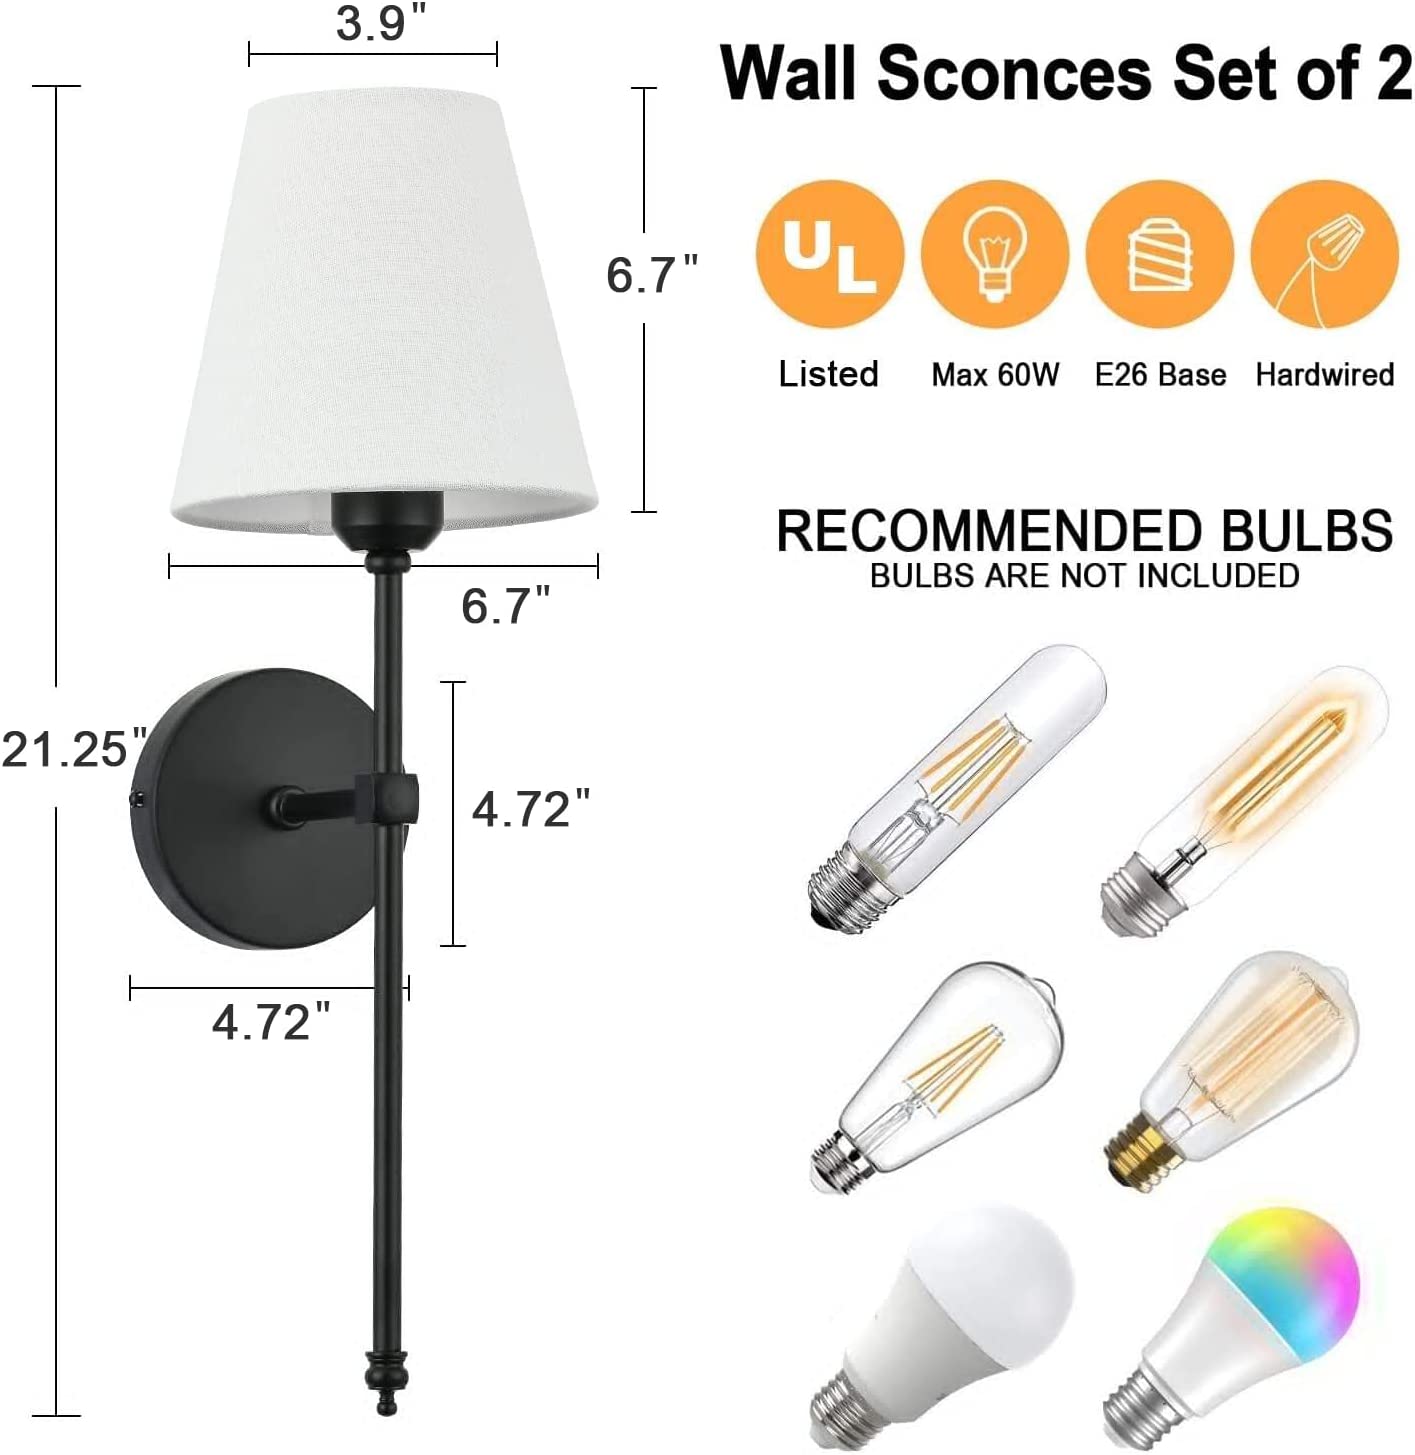 Bsmathom Wall Sconces Sets of 2, Rustic Industrial Wall Lamps, Column Stand Sconces Wall Lighting, Bathroom Vanity Light Fixture with Fabric Shade for Bedroom Living Room Kitchen, Black